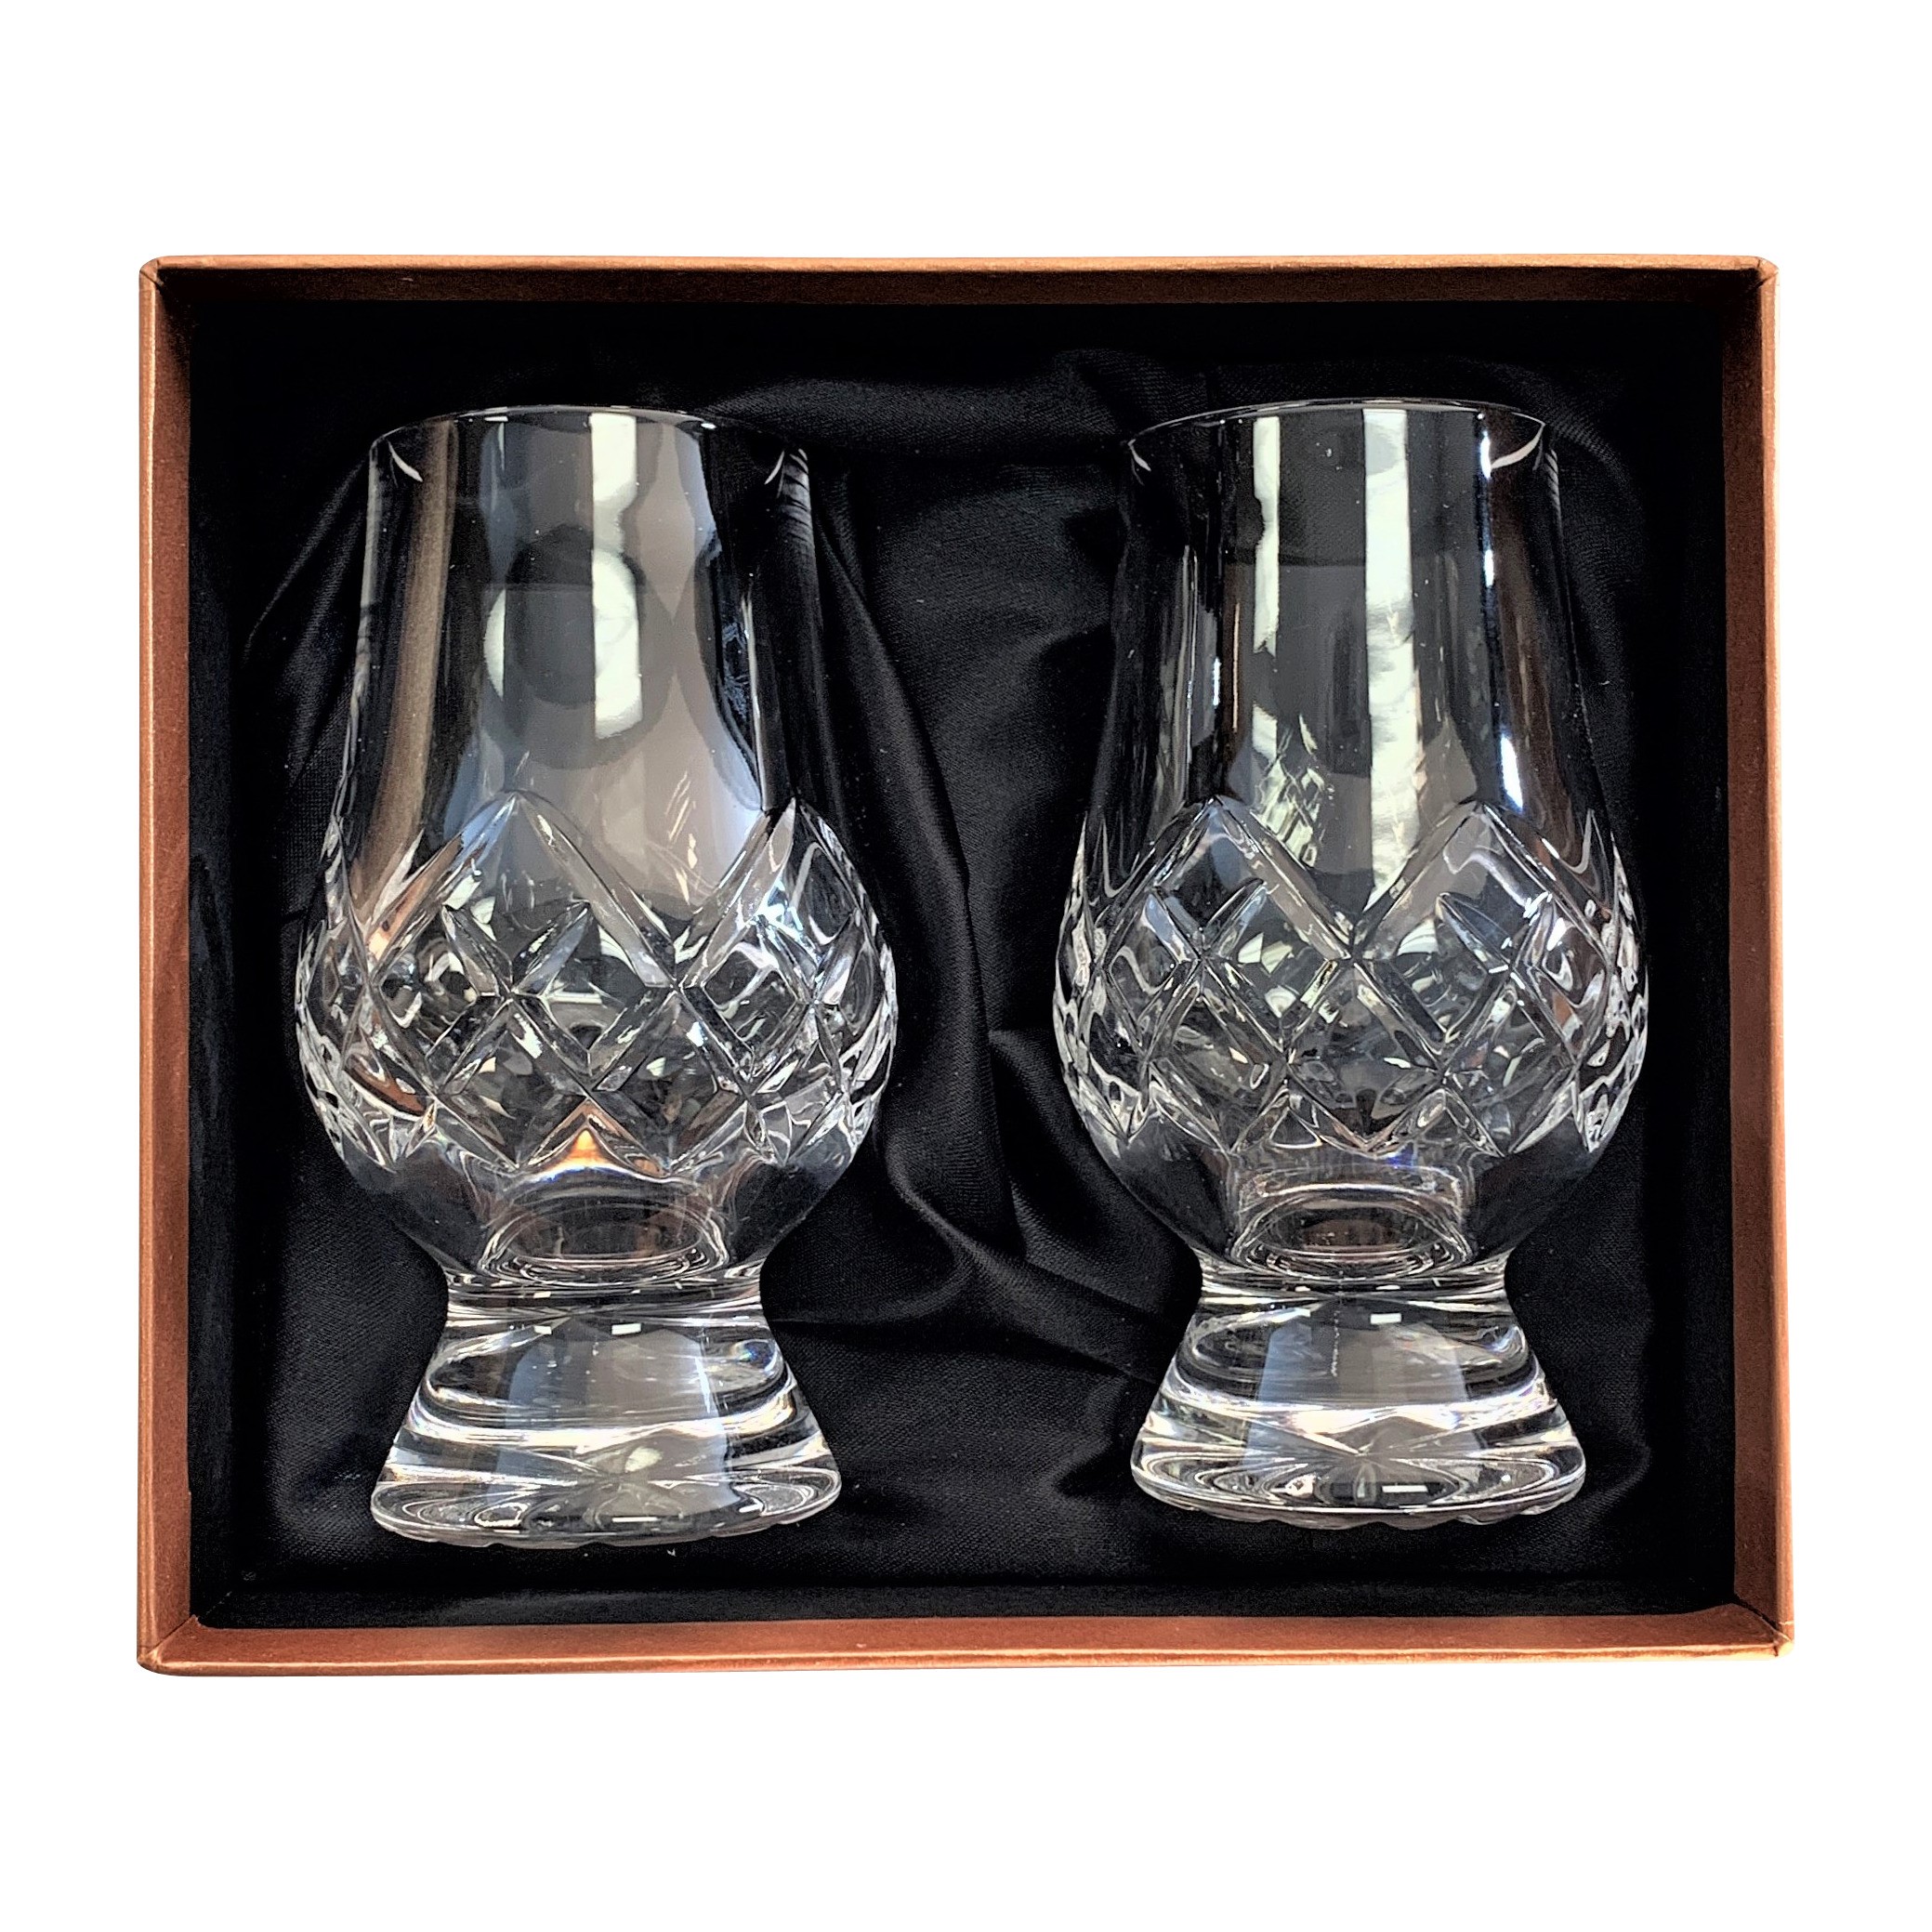 The Glencairn Official Cut Crystal Whisky Glass Set of 2 Presentation Box 